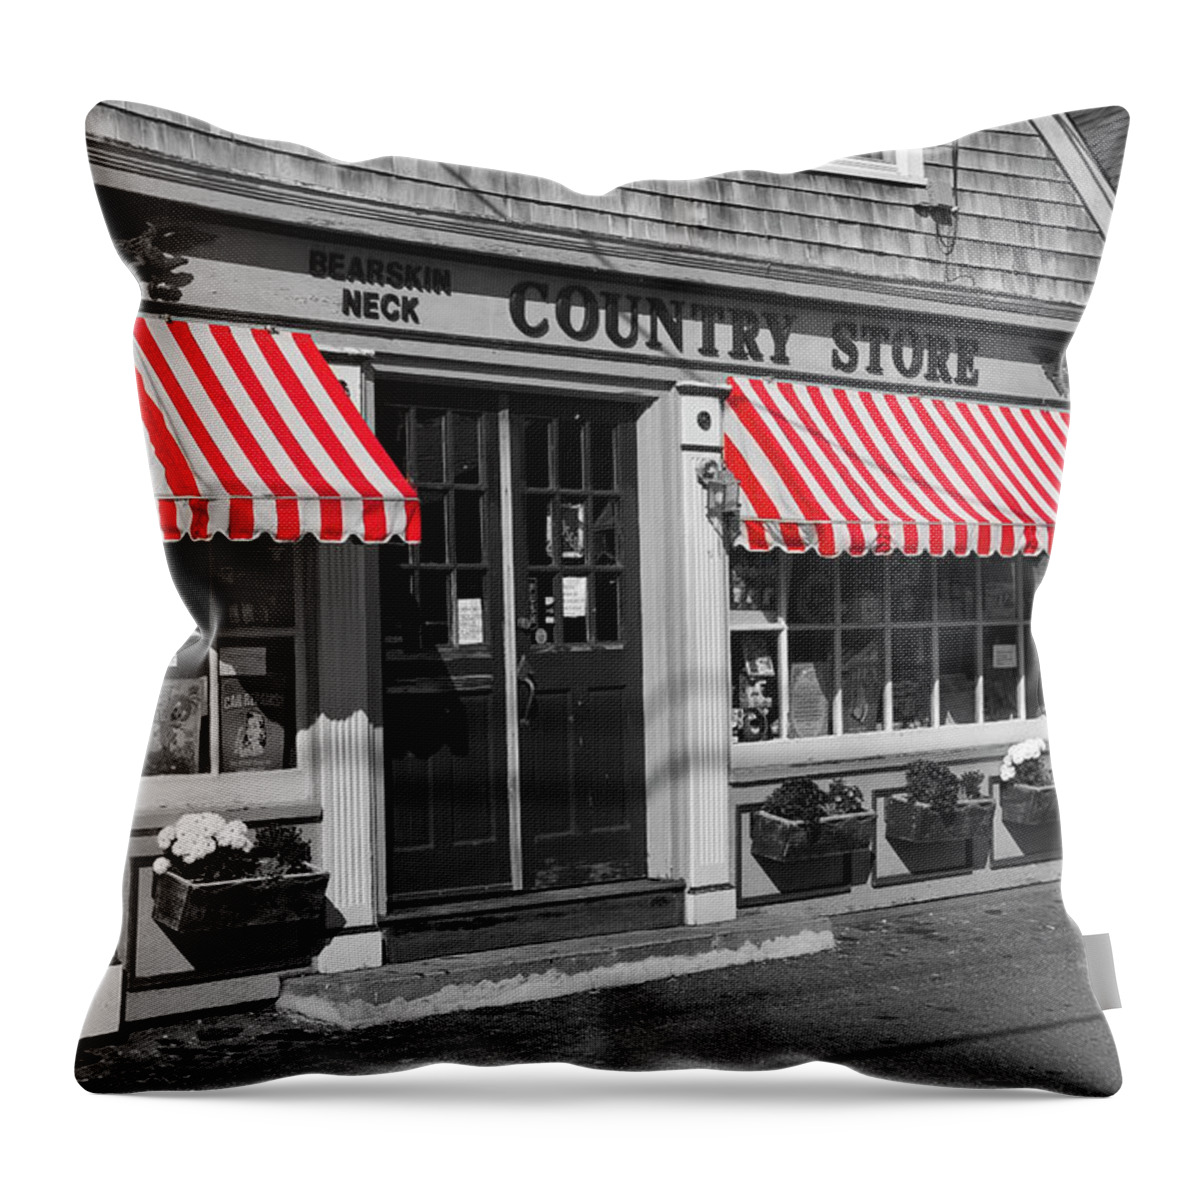 Awning Throw Pillow featuring the photograph Rockport Country Store - BW by Lou Ford